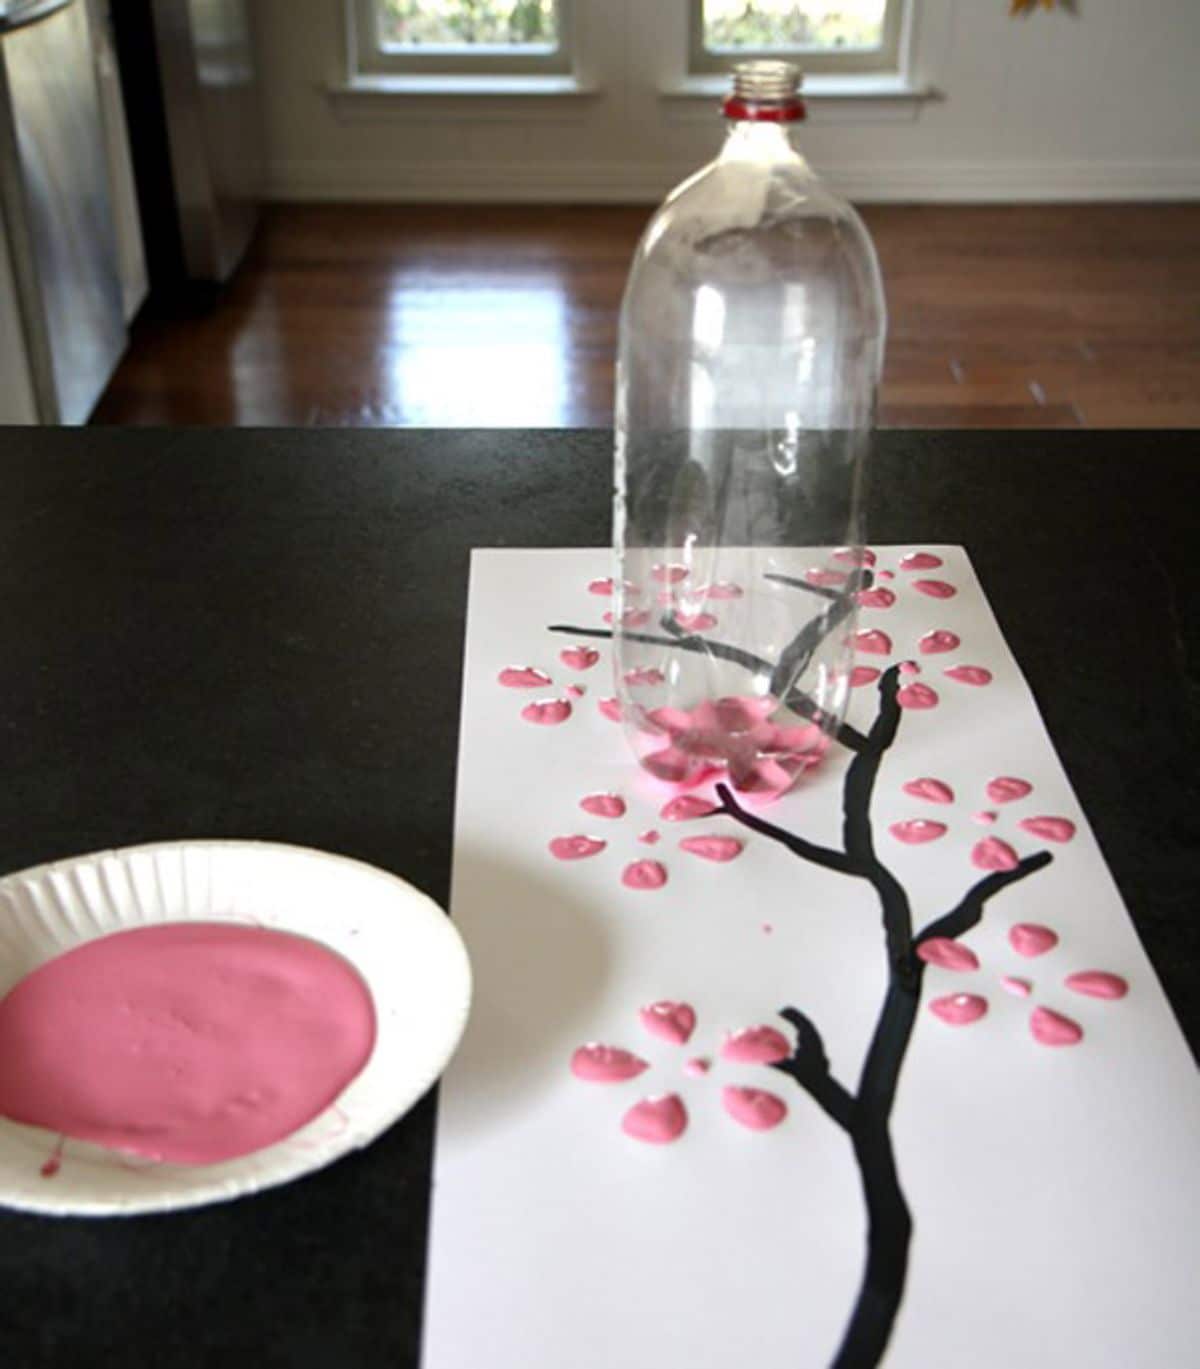 on a table is a paper plate full of pink paint, a white piece of paper with a black branch painted on it, and paint petals. A 2 litre water bottle sits on the paper with paint on the bottom